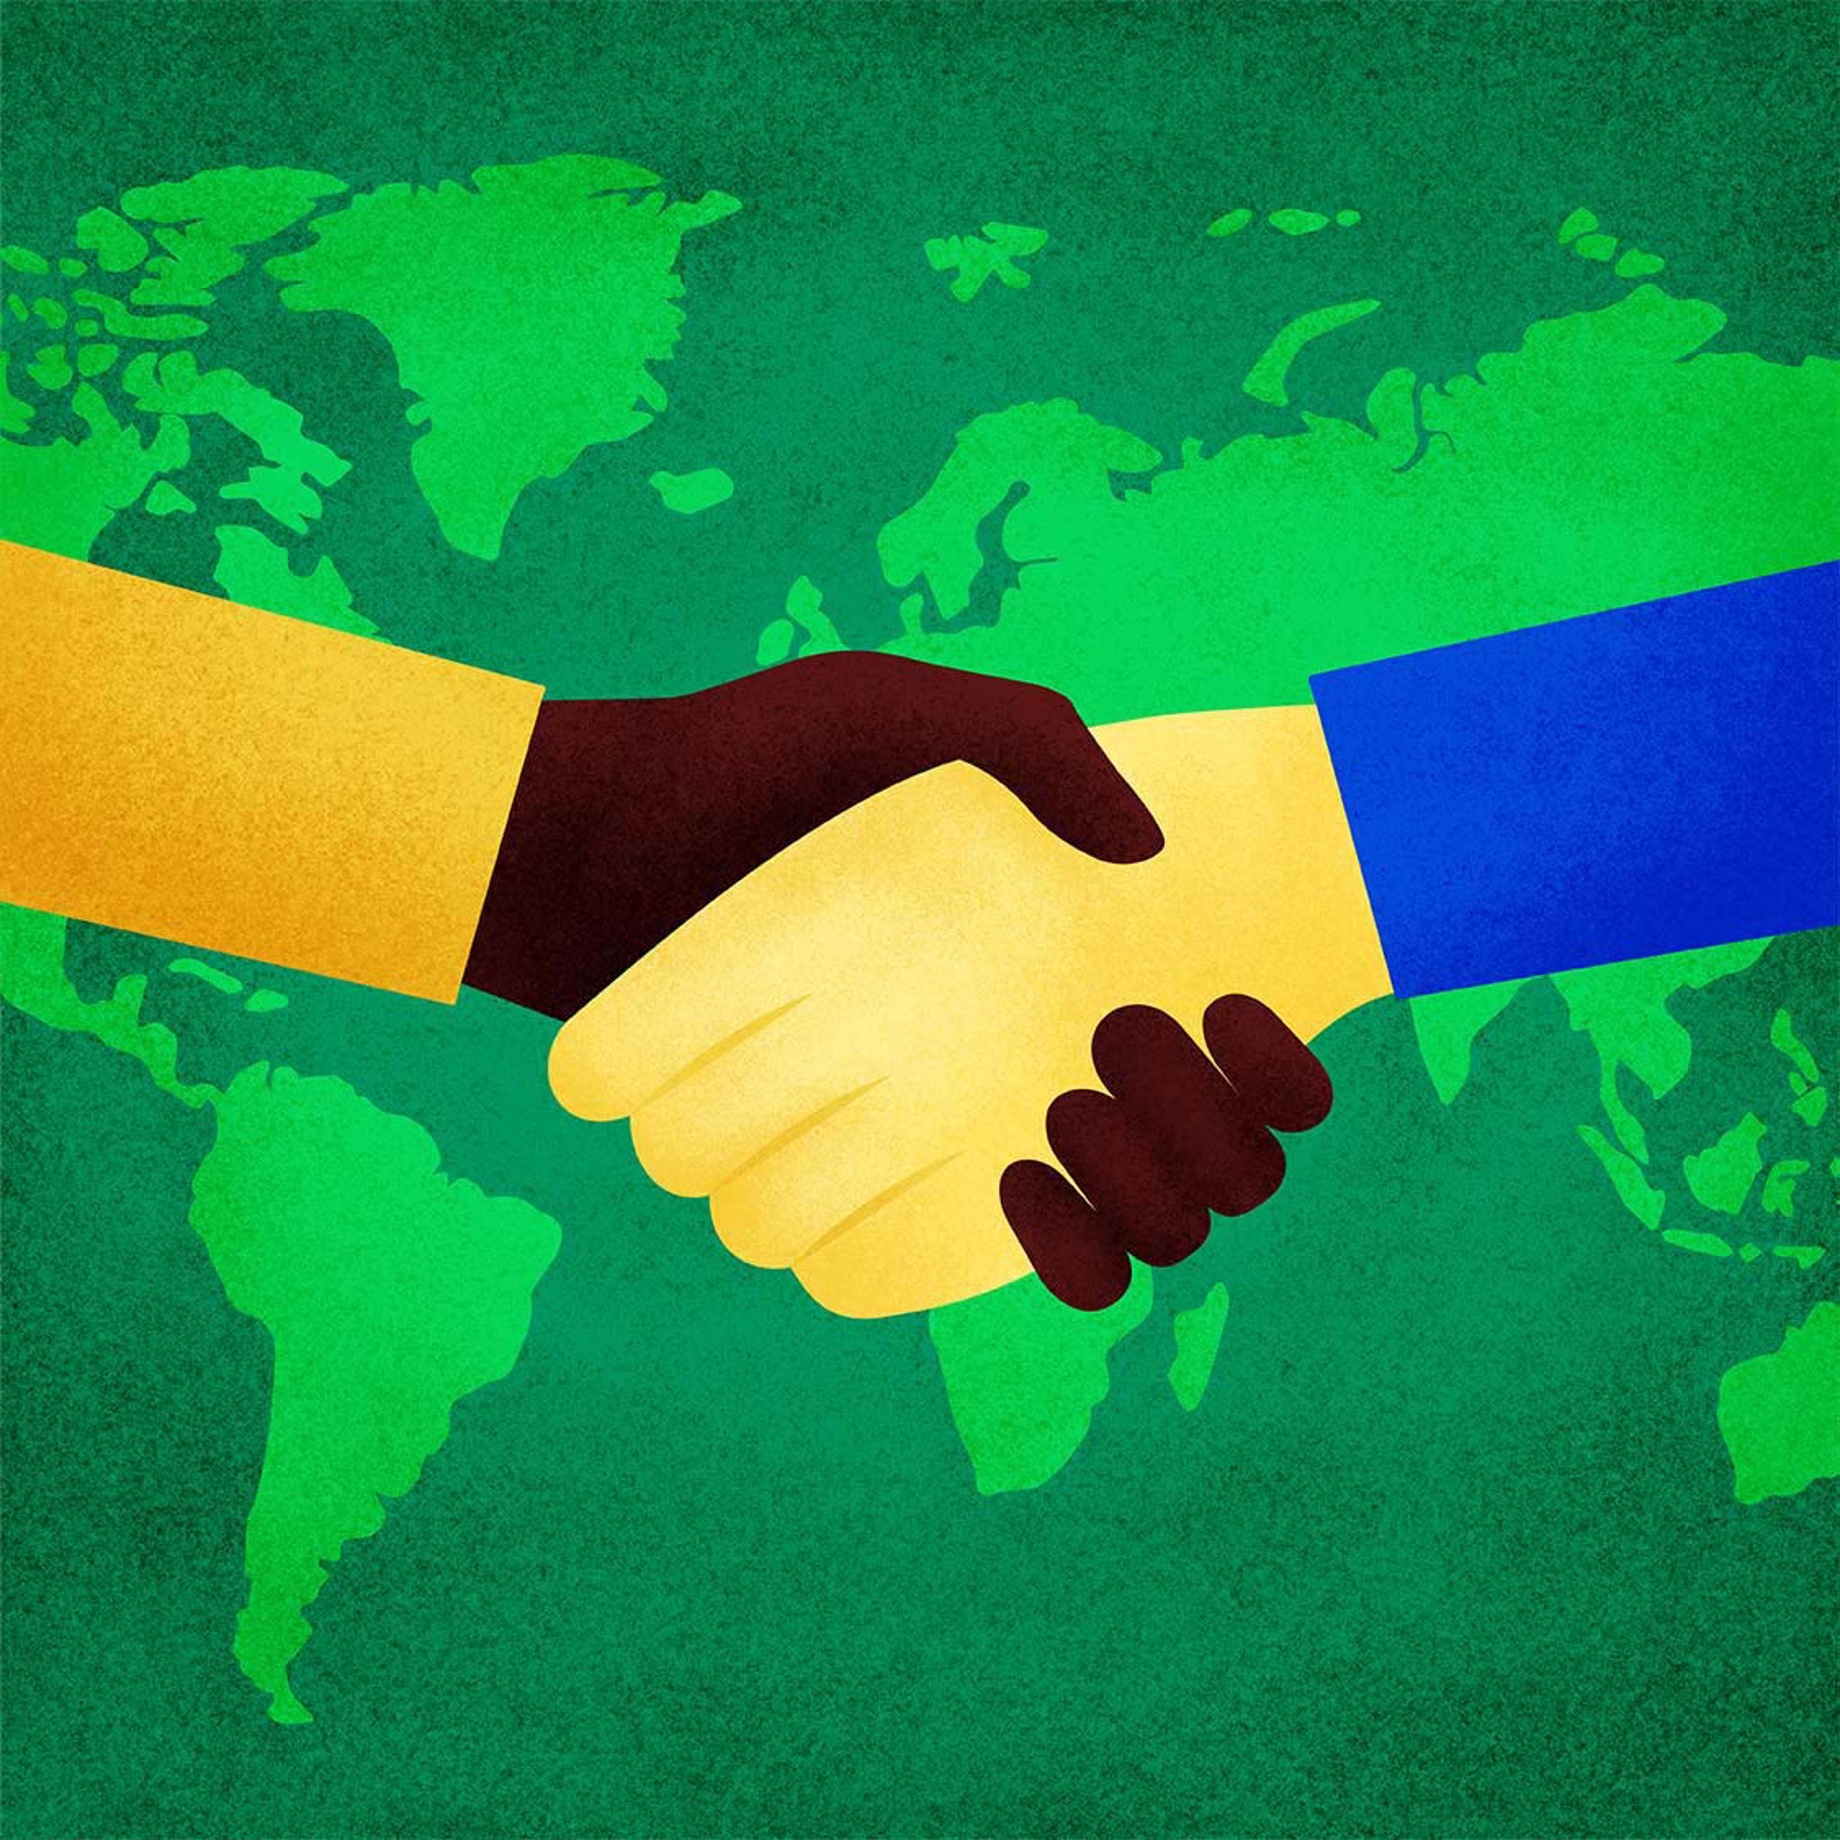 An illustration of people shaking hands